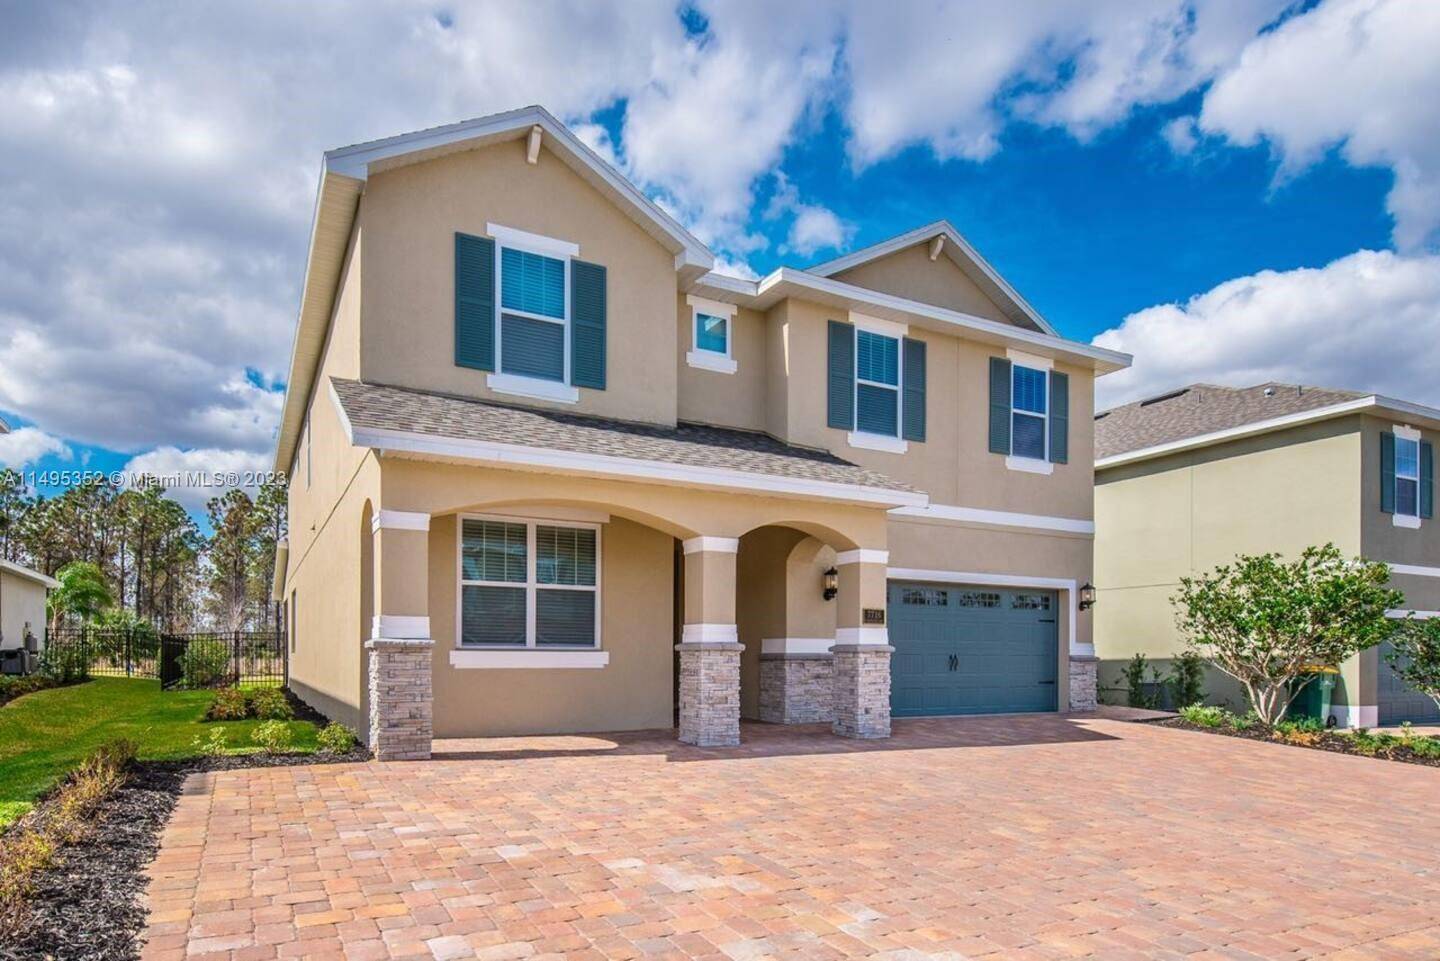 This stunning two story 8 bedroom single family Orlando home is the perfect place to have the best Vacation with the entire family.